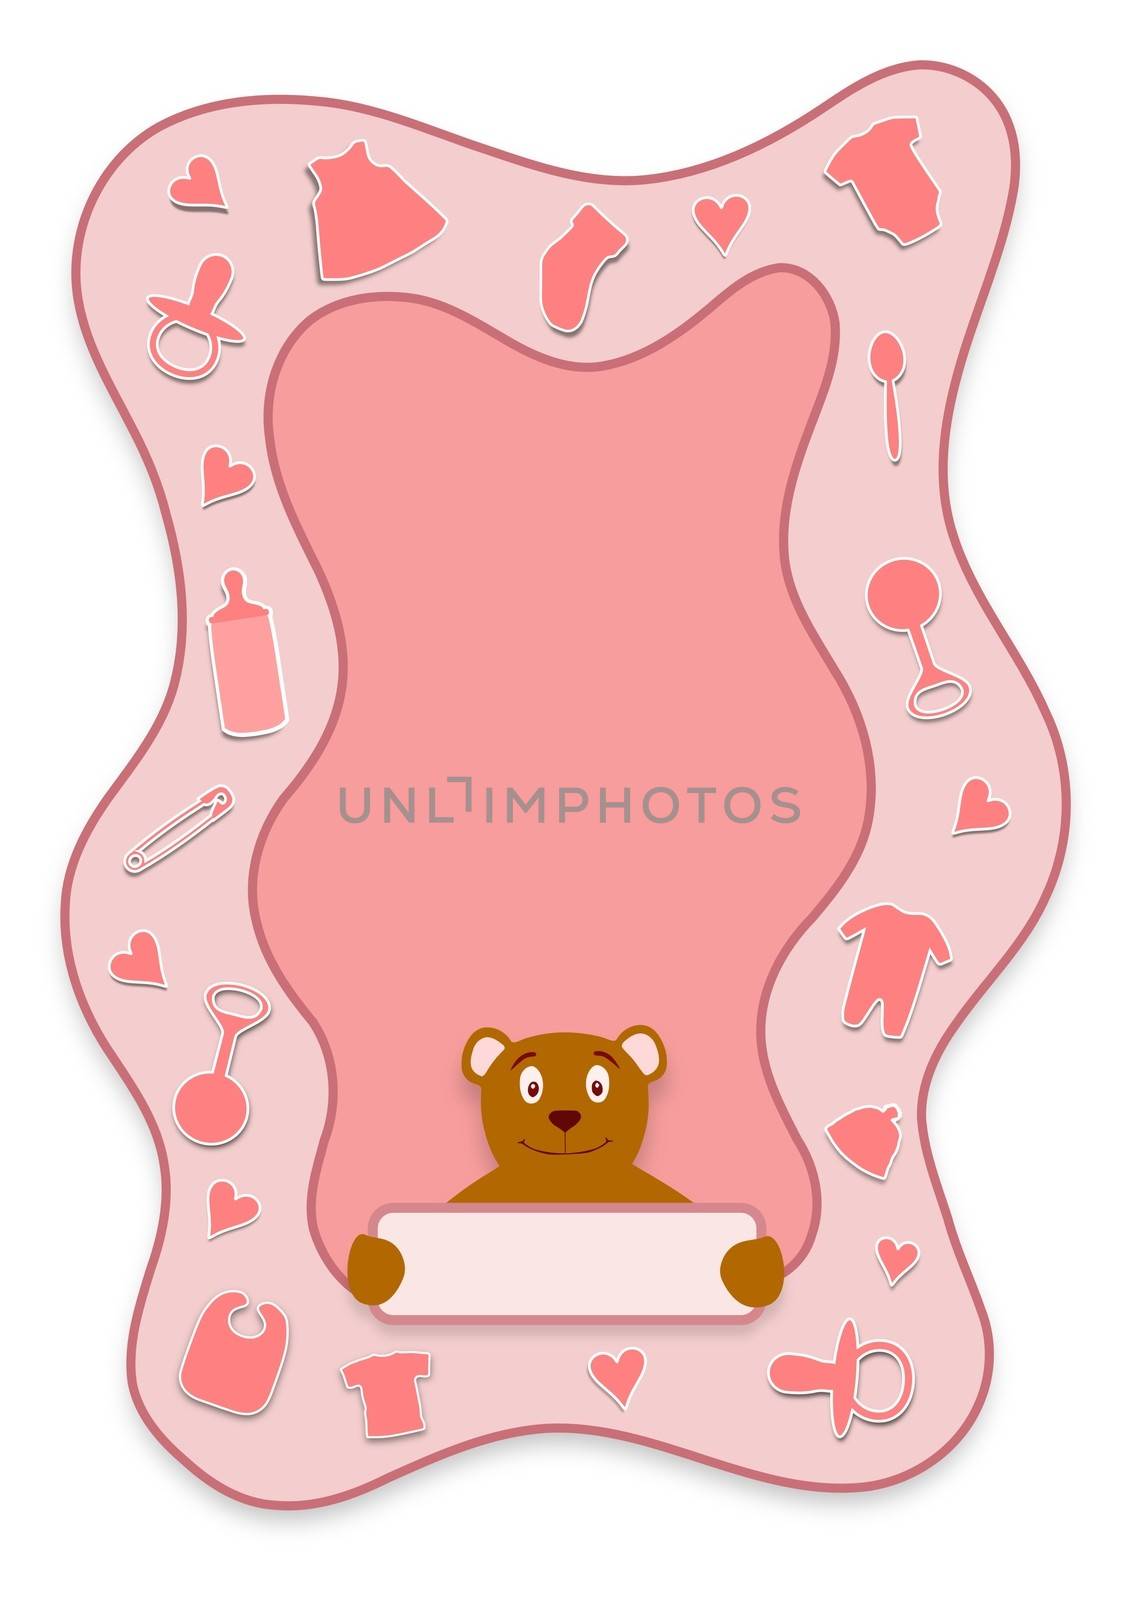 Illustration of a pink frame with baby items and a teddy bear holding a sign